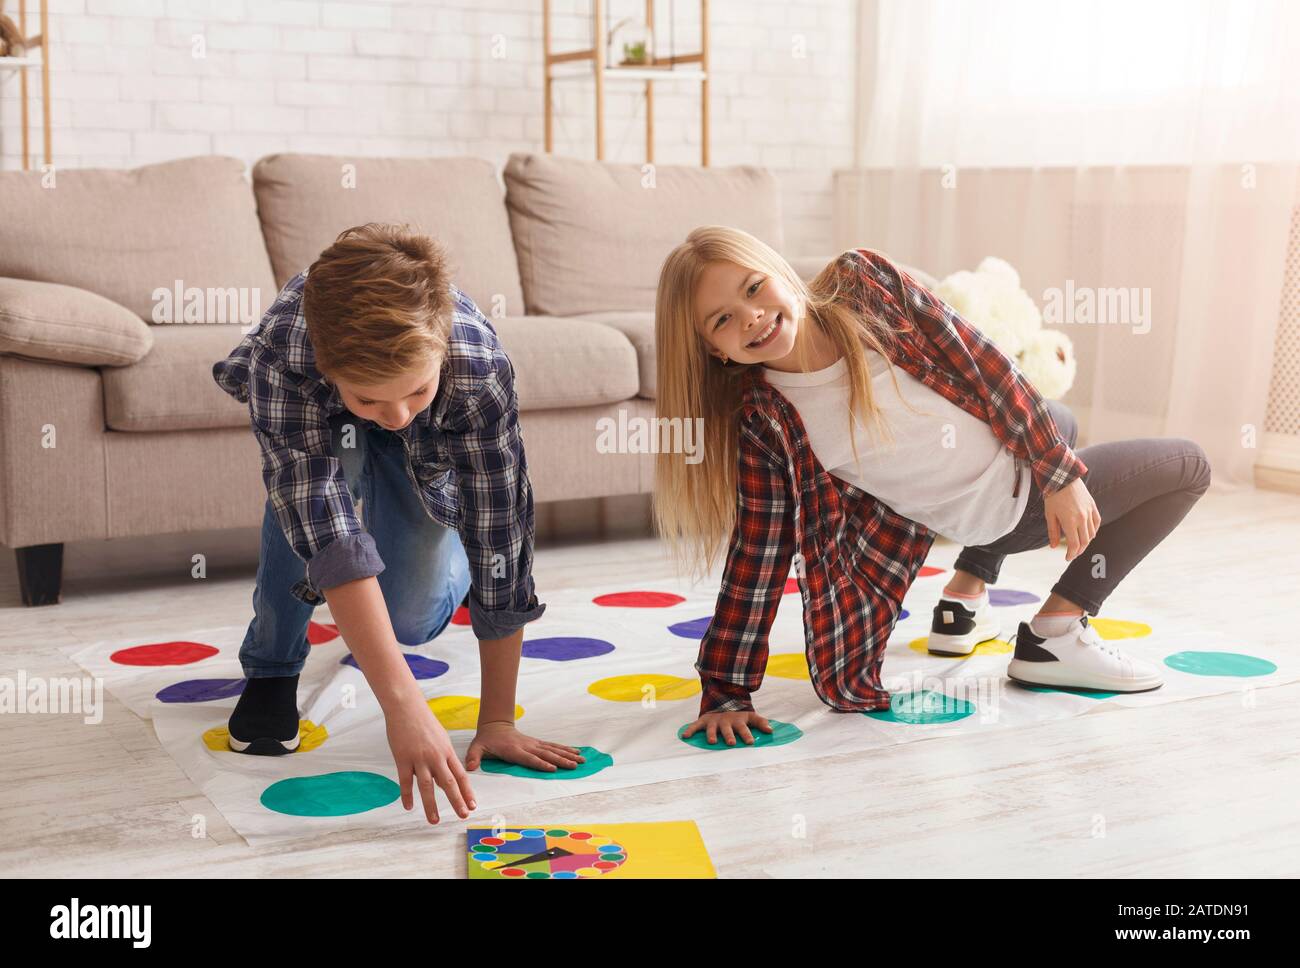 Boy And Girl Playing Twister Game Together On Floor Indoor Stock Photo